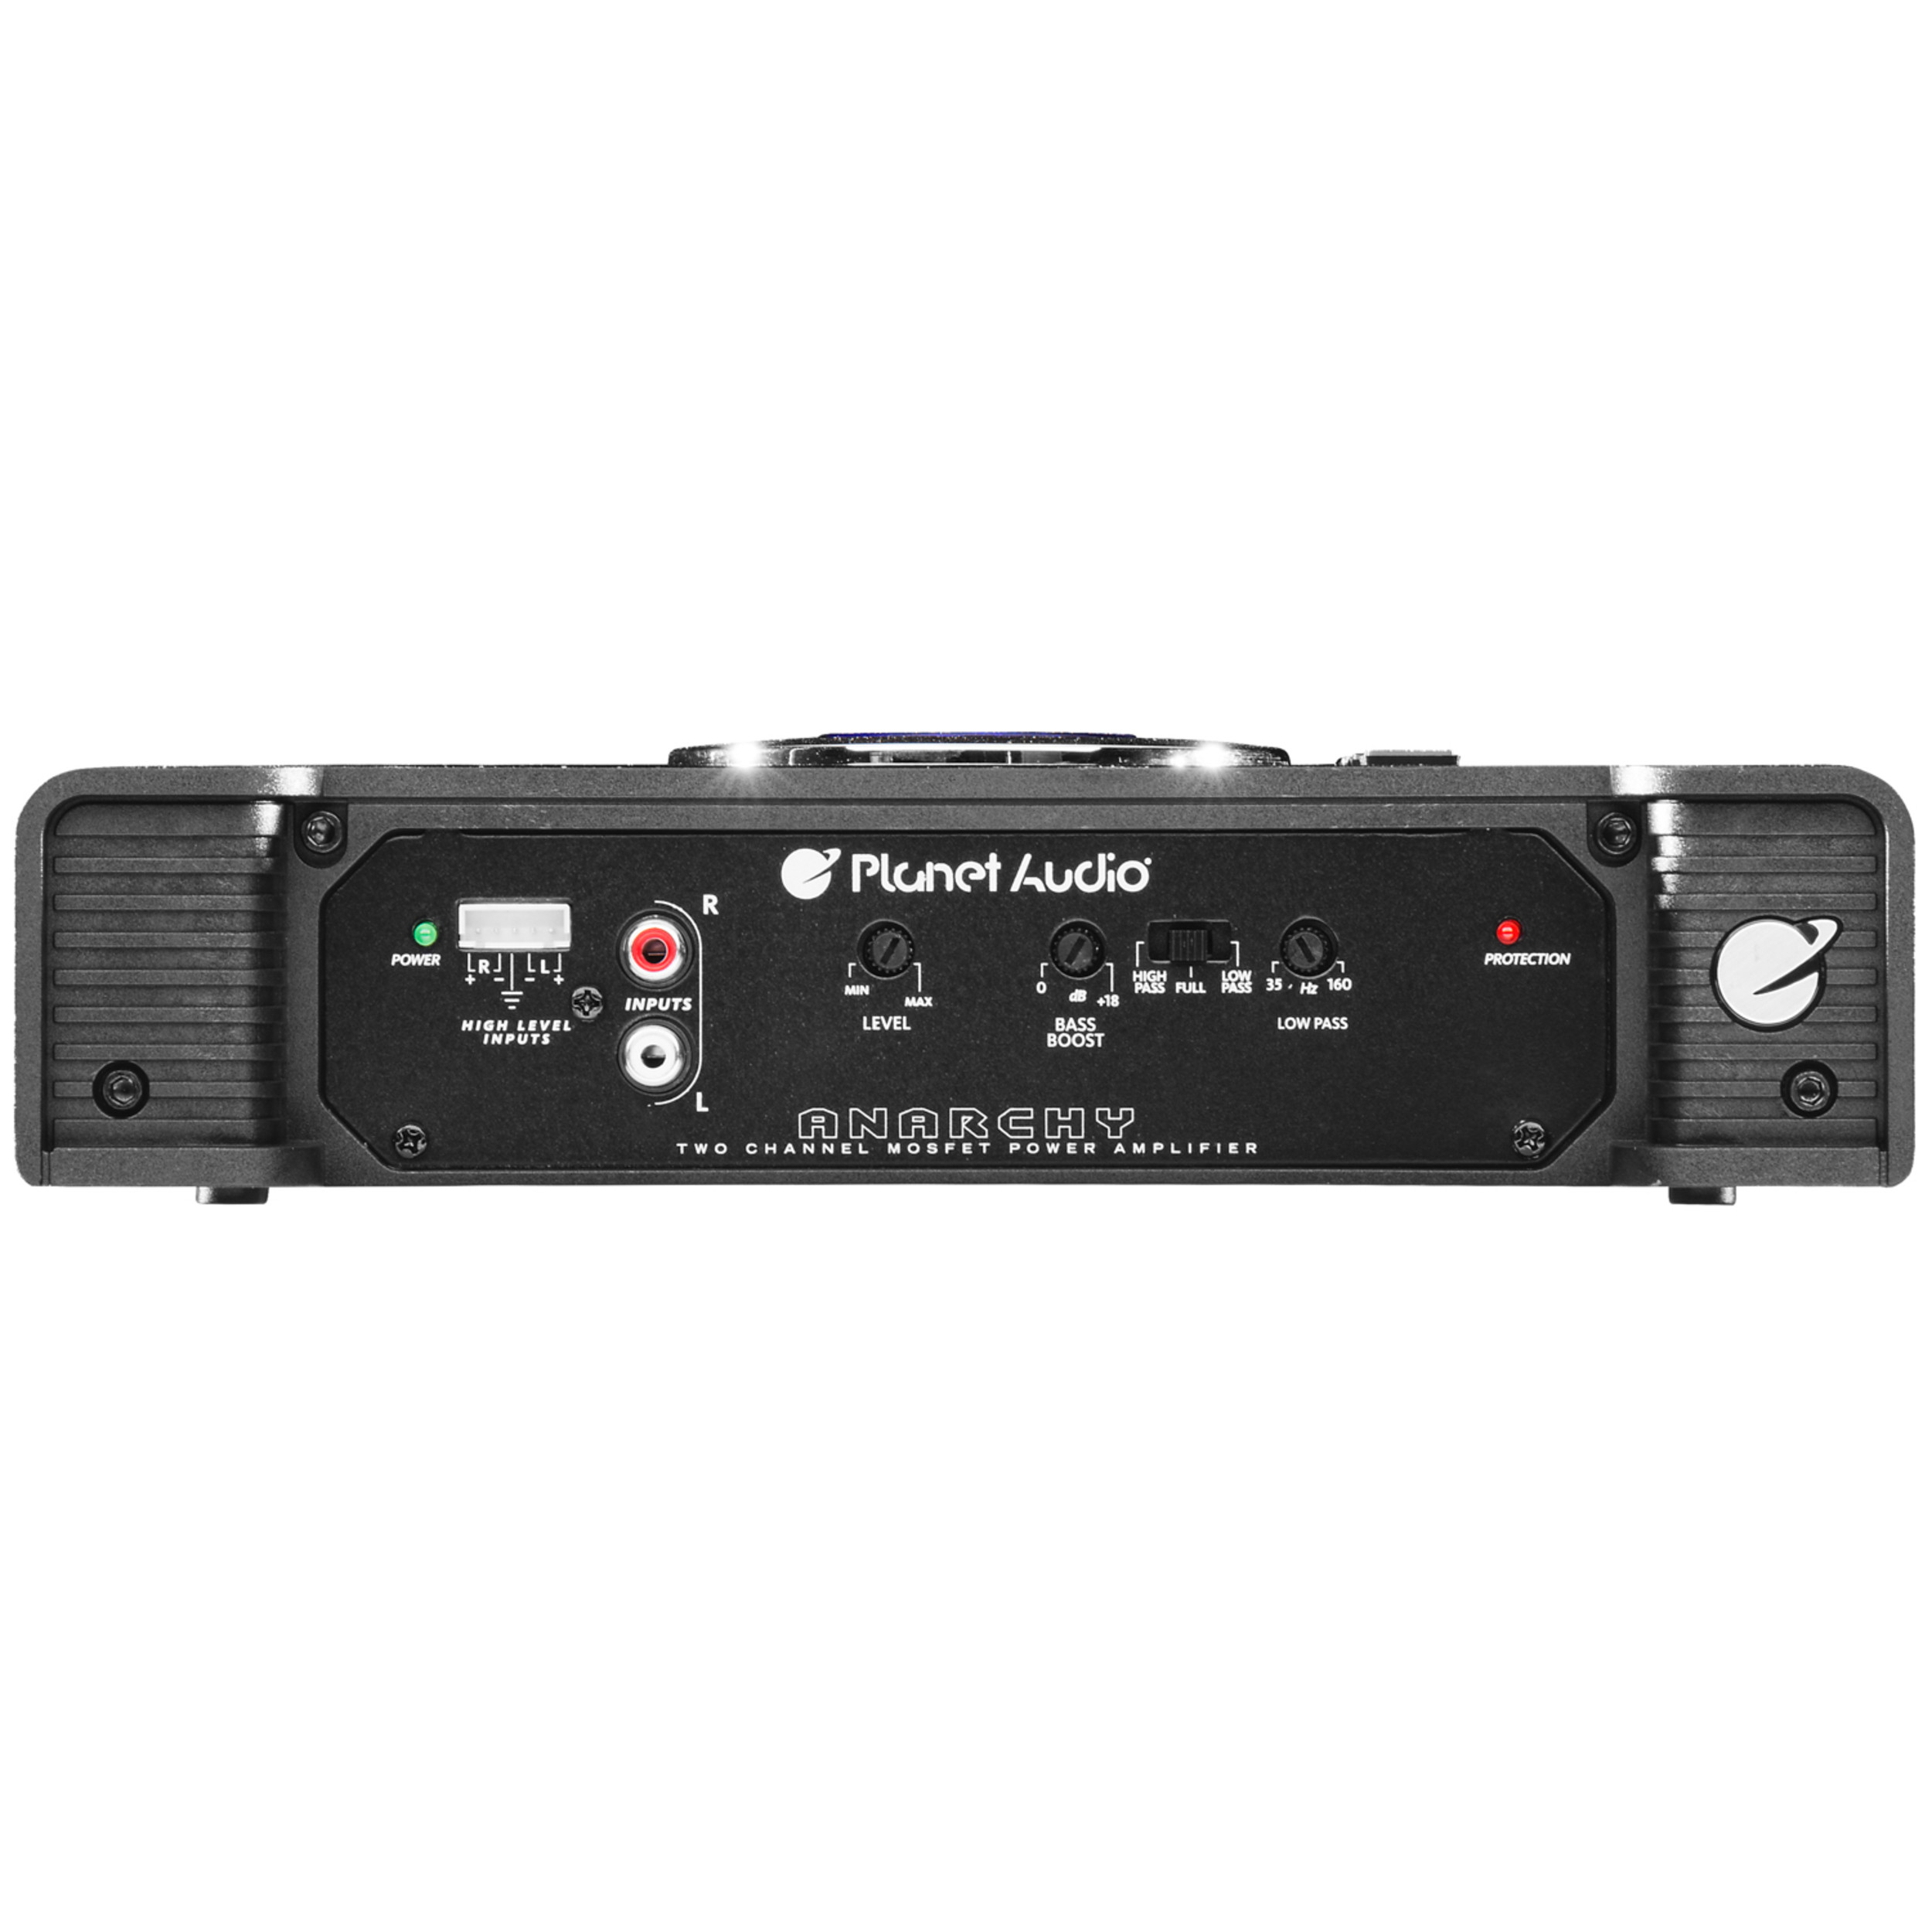 Planet Audio AC600.2 Anarchy Series Car Audio Amplifier - 600 High Output, 2 Channel, Class A/B, High/Low Level Inputs, High/Low Pass Crossover, Bridgeable, Full Range, For Stereo and Subwoofer - image 5 of 9